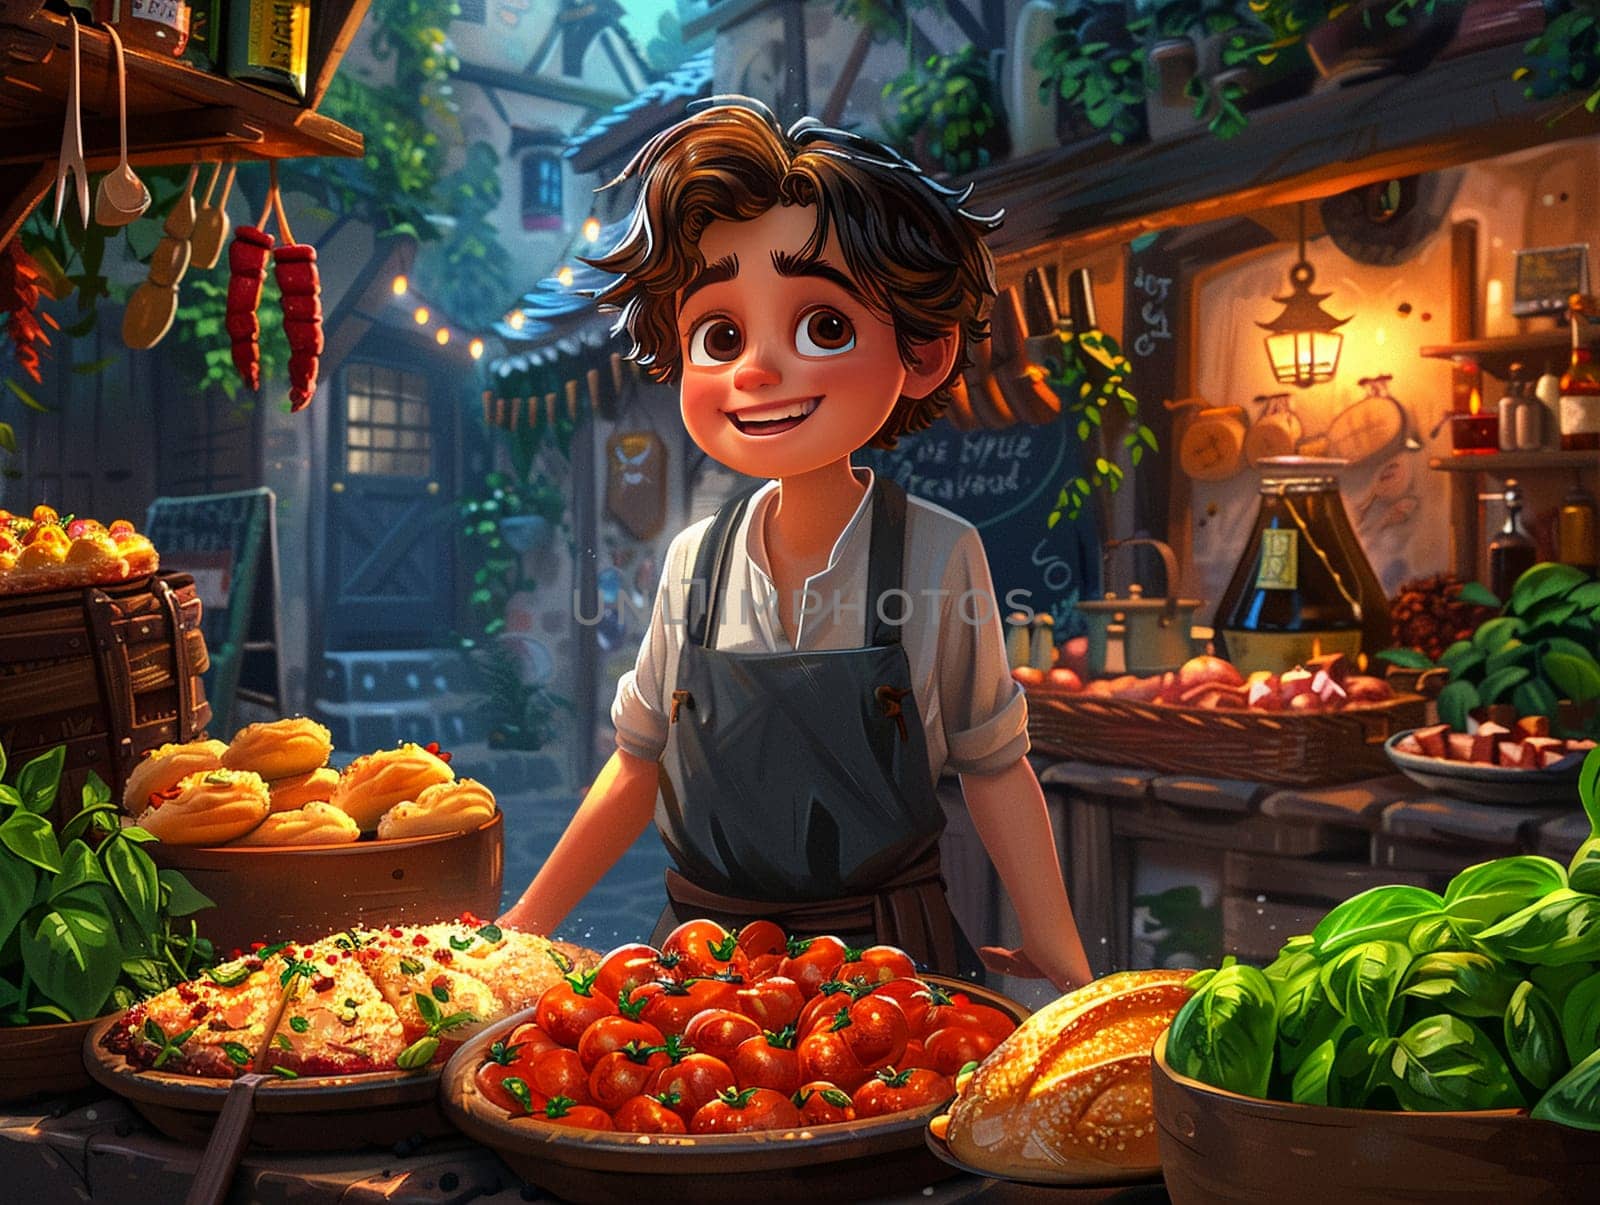 Foodie adventure in a magical realm, cartoon style featuring fantastical dishes and culinary quests.